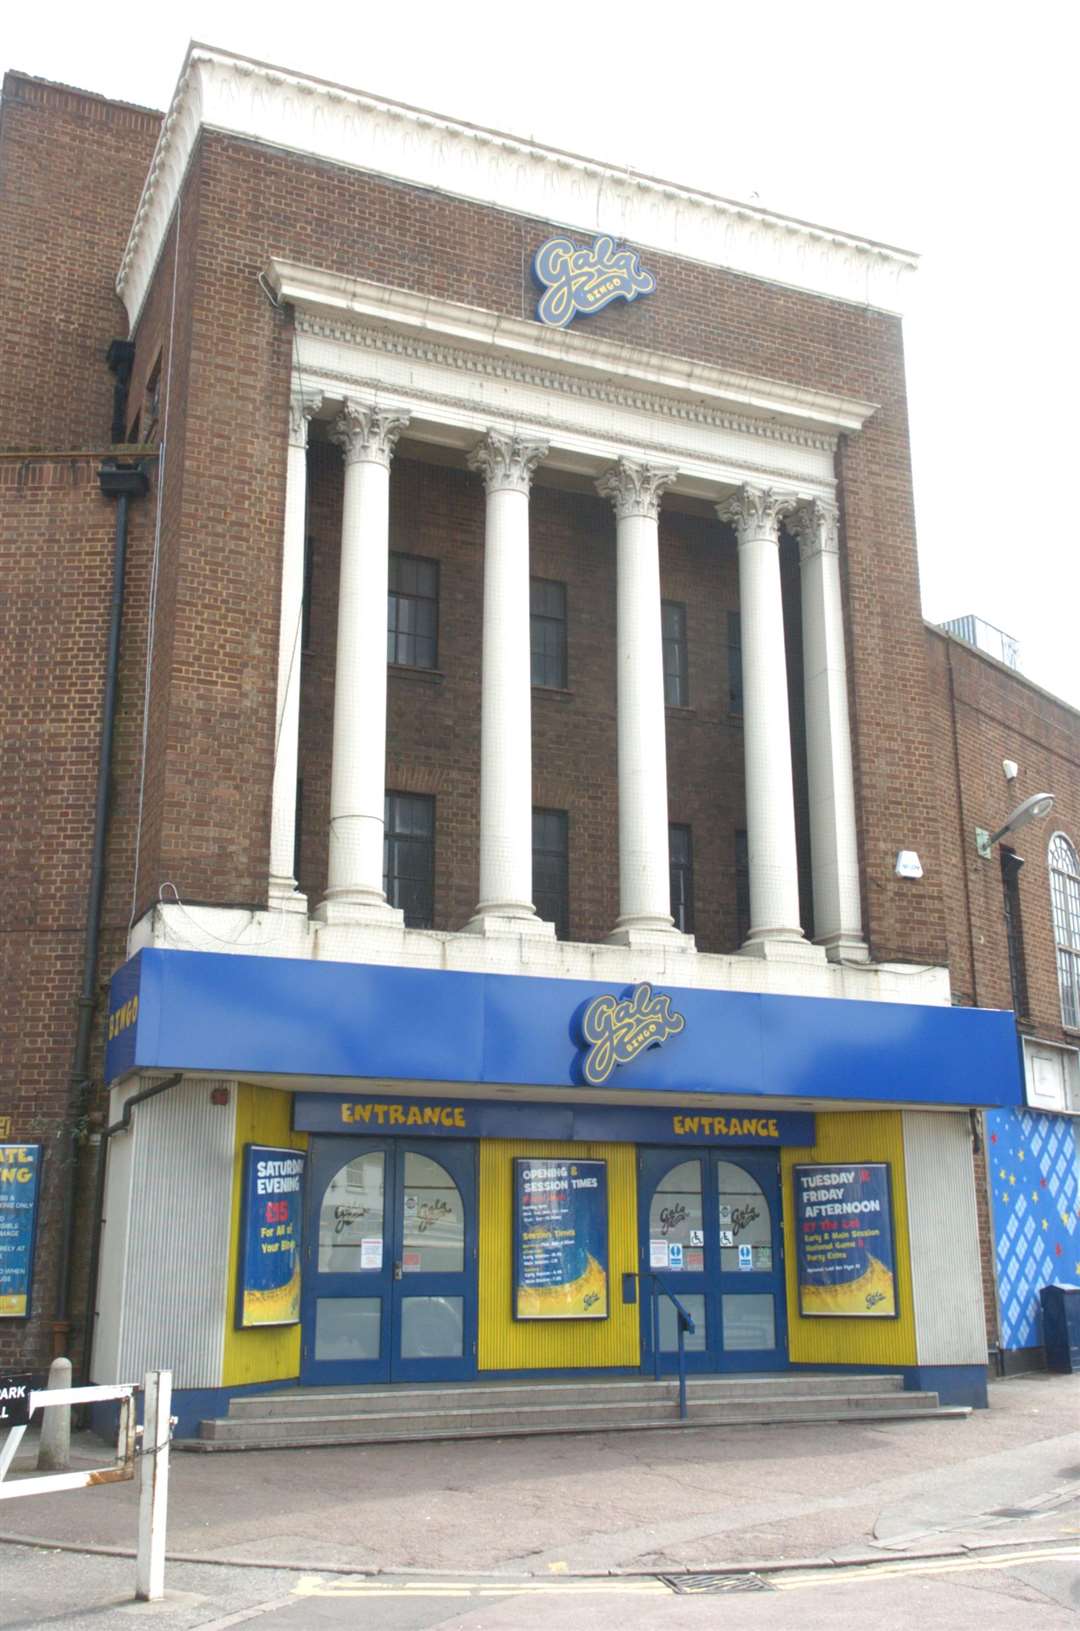 The Gala Bingo building at the bottom of Gabriel's Hill